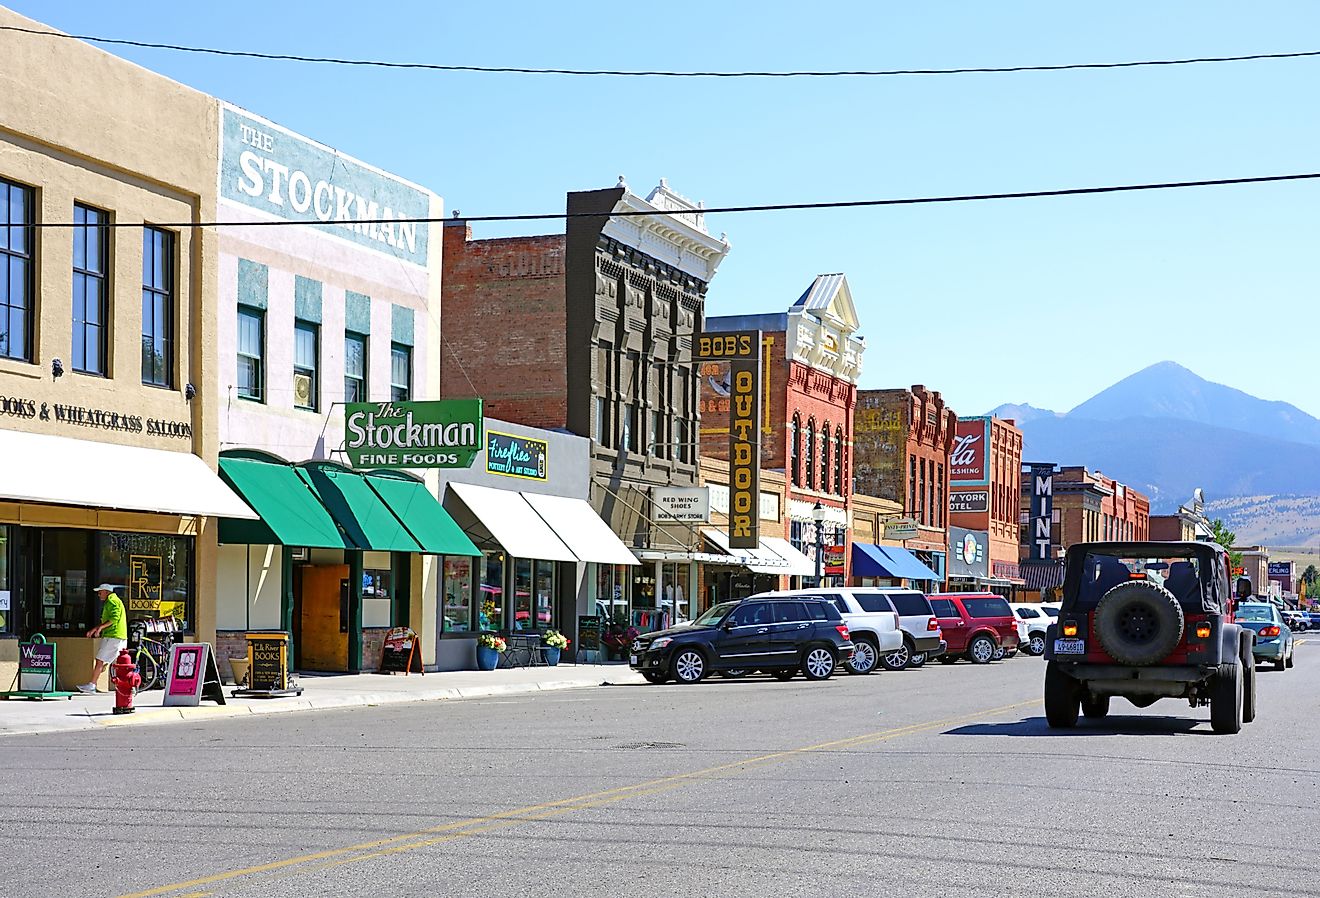 Buildings lining a street in downtown Livingston, Montana. Image credit EQRoy via Shutterstock.com